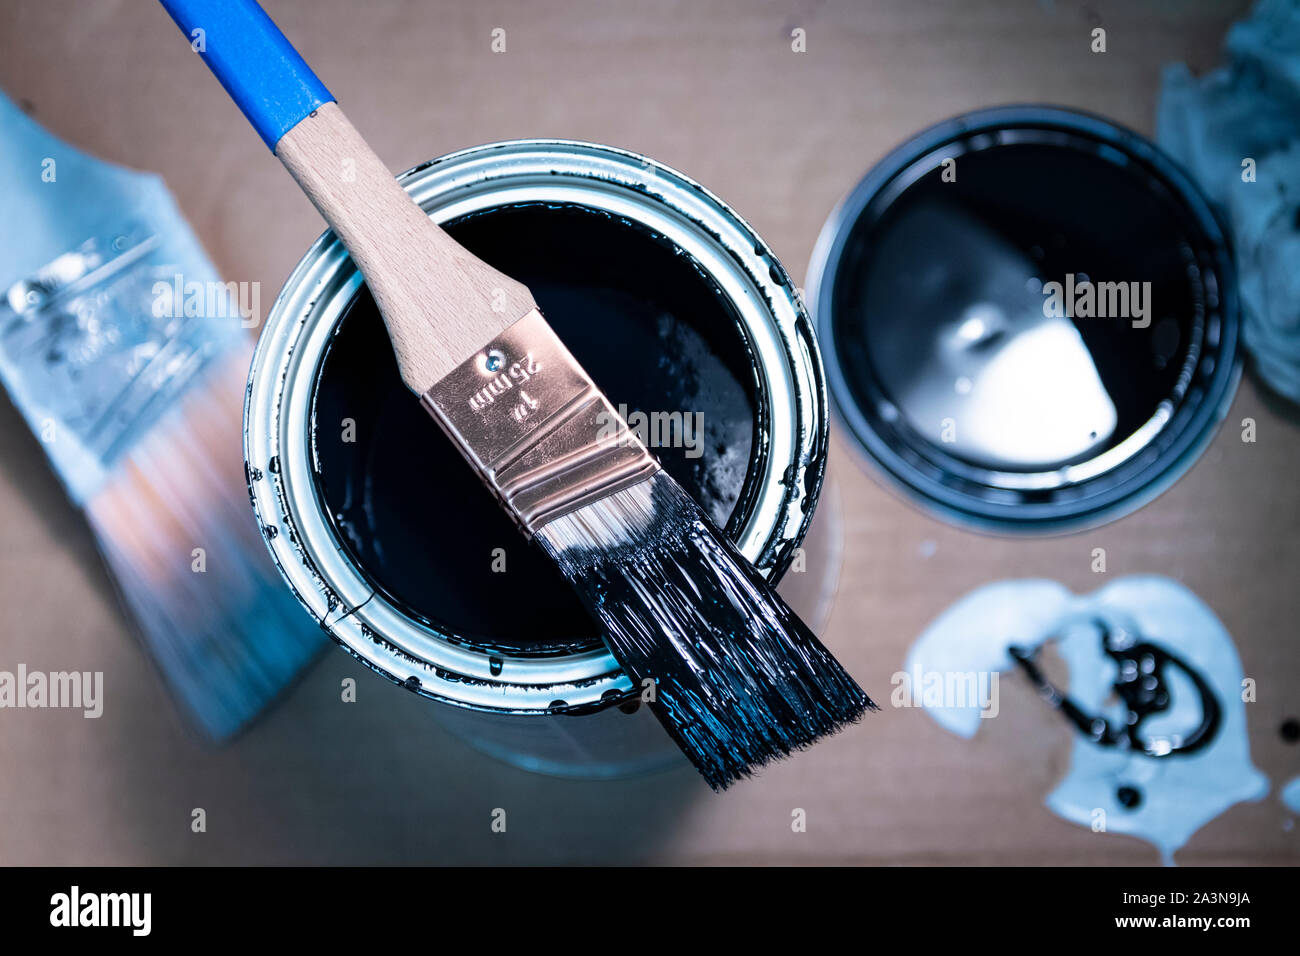 1 inch paintbrush resting on open can of enamel paint Stock Photo